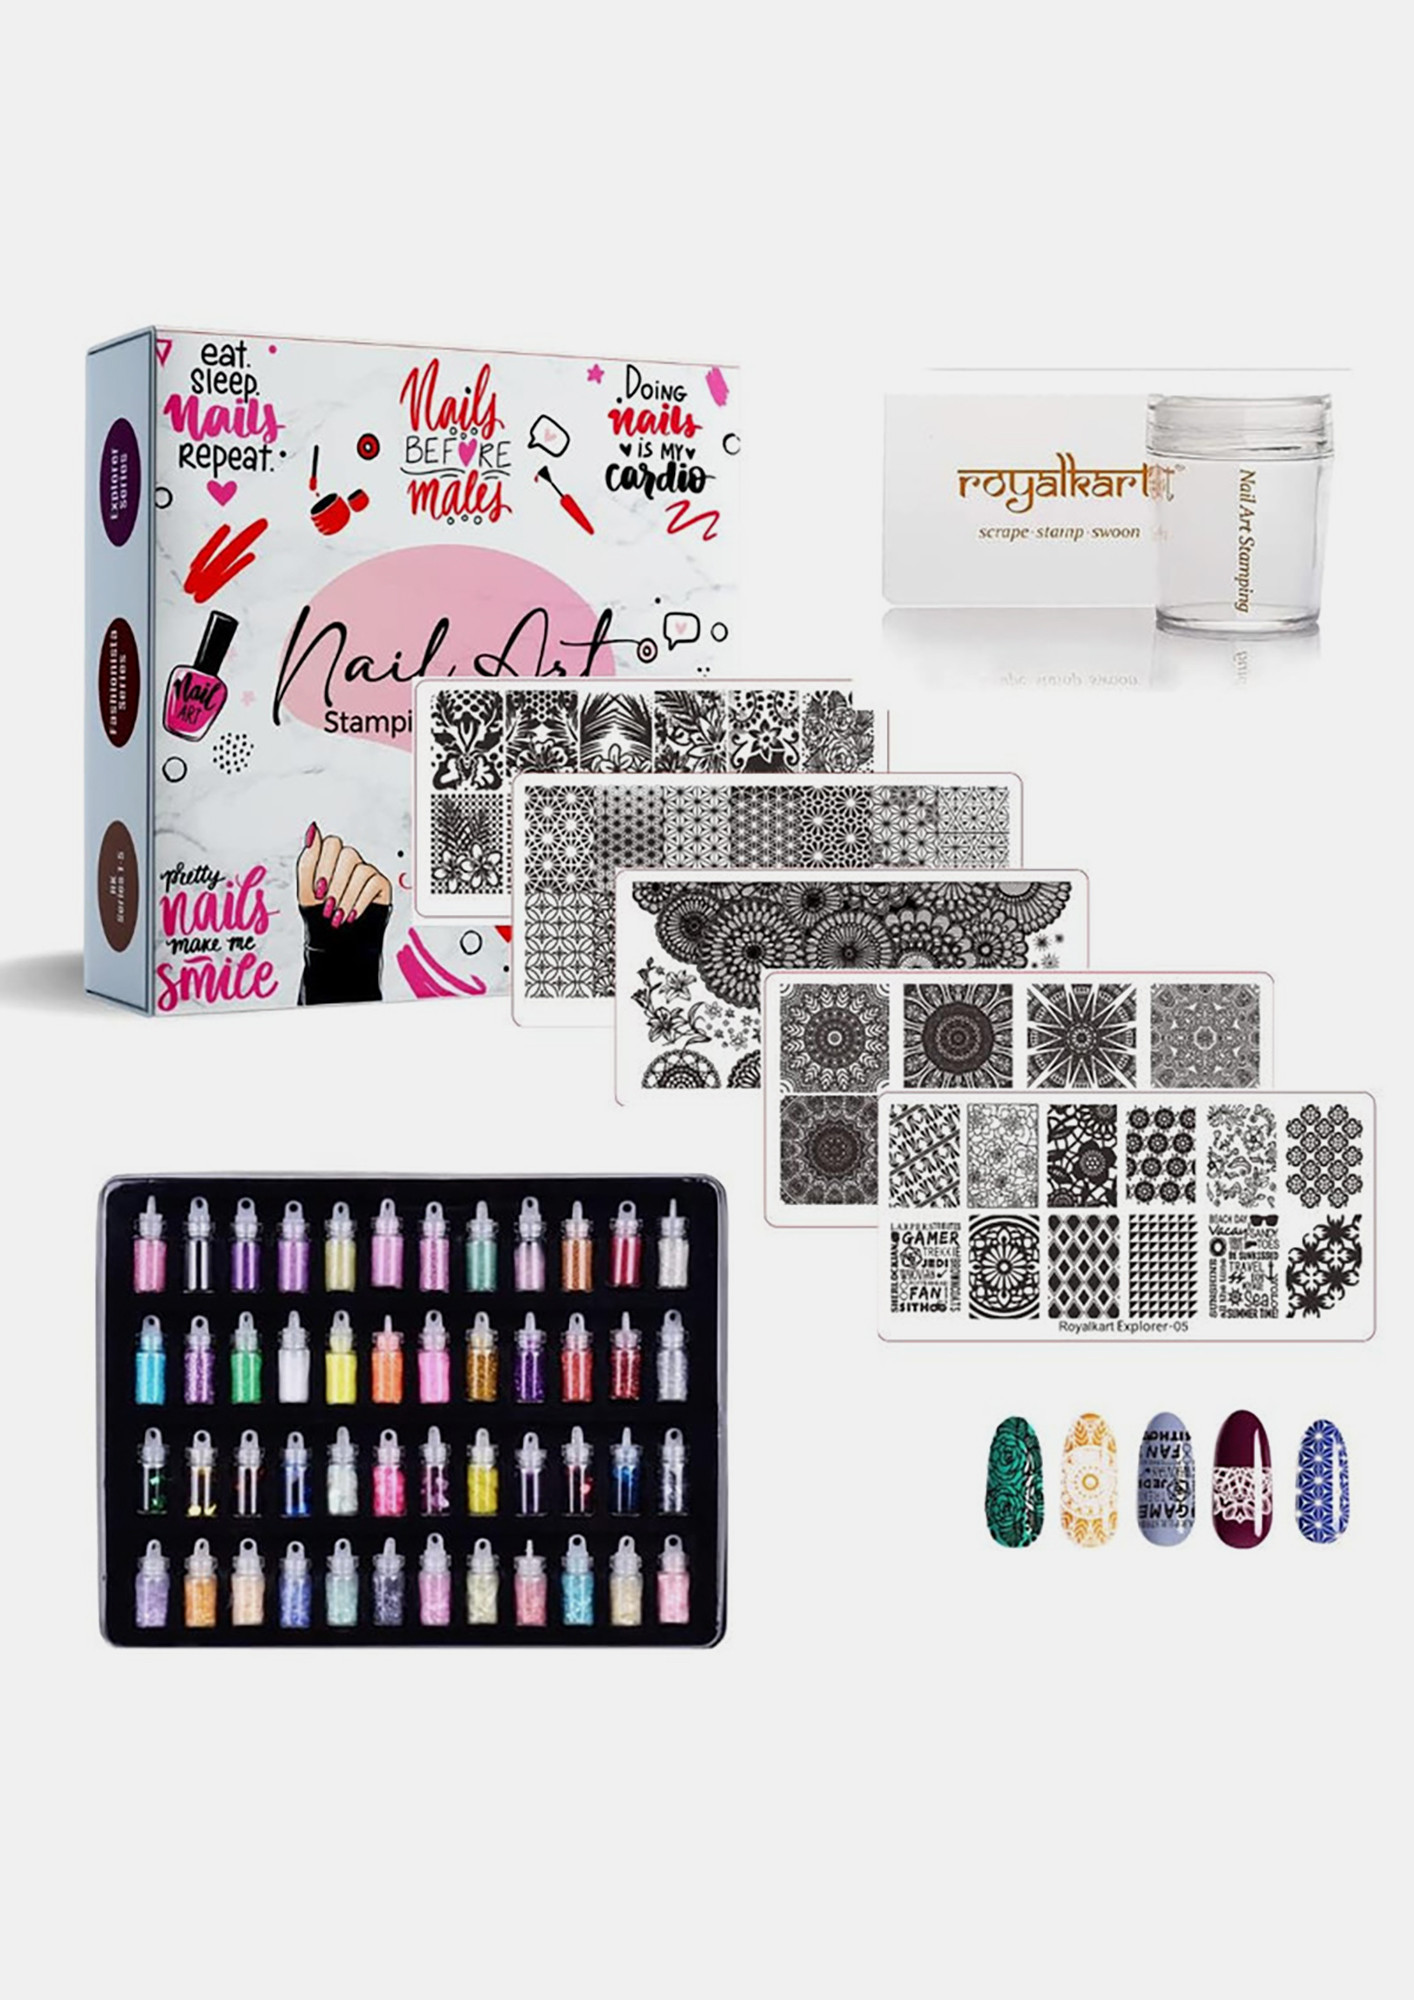 Nail Art Kit With 2 Plates, 15 Pc Nail Art Brush Set, 5 Pc Nail Dotting Tool  Set, 1 Silicon Stamper And Scrapper Complete Set. - 24x7 eMall